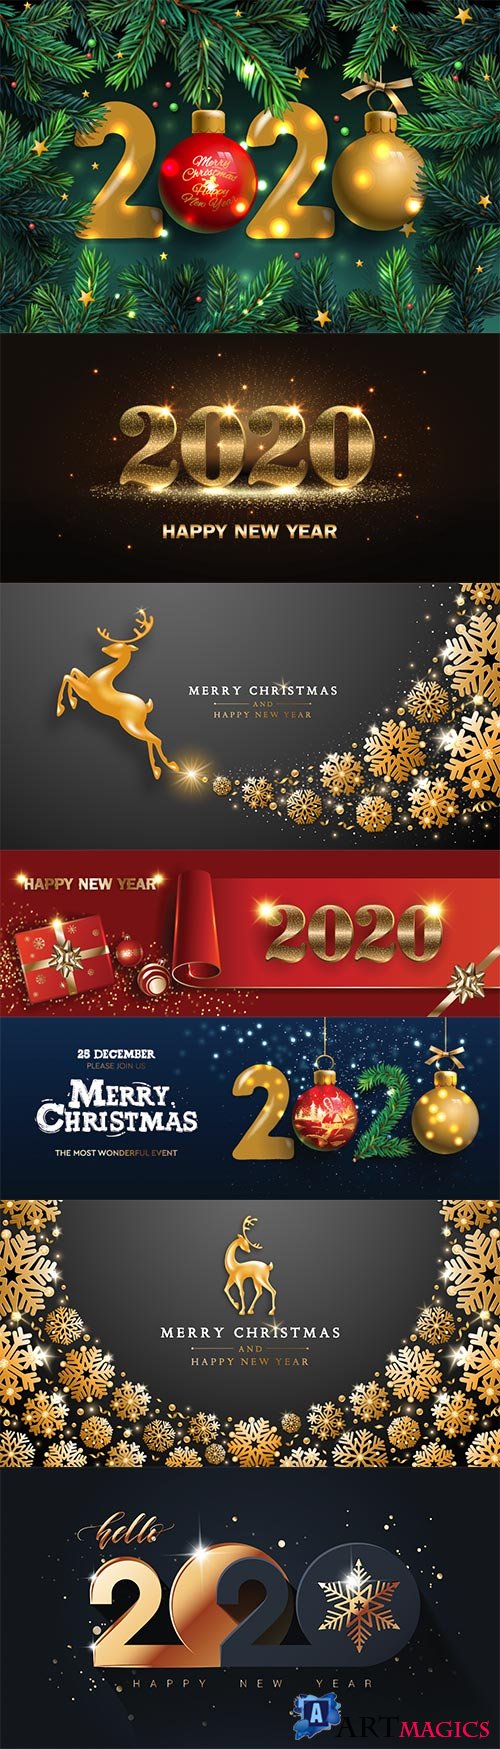 Happy New Year 2020 template, holiday vector